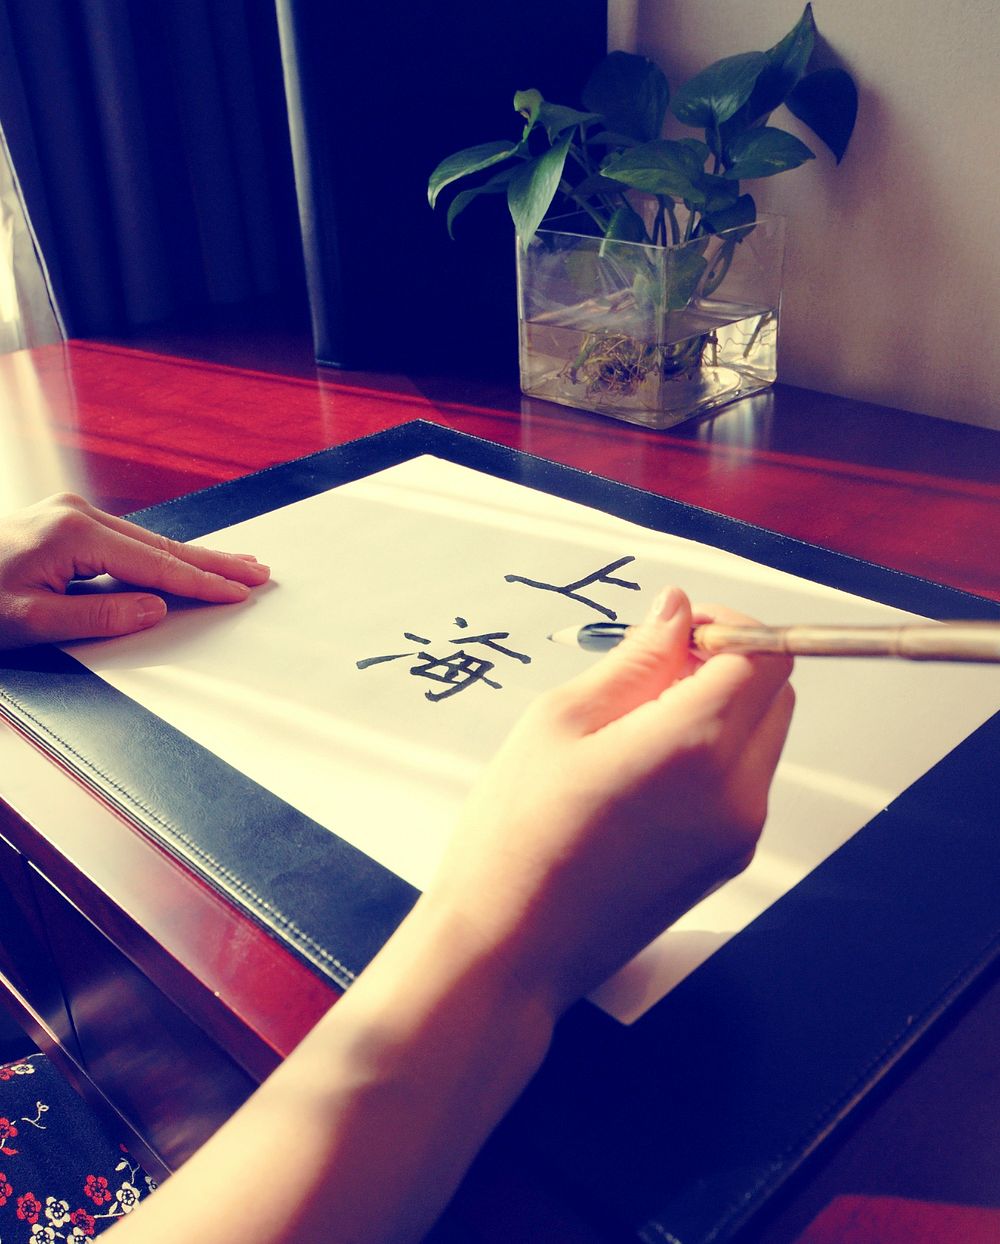 Close up of a lady writing "Shanghai" in Chinese.